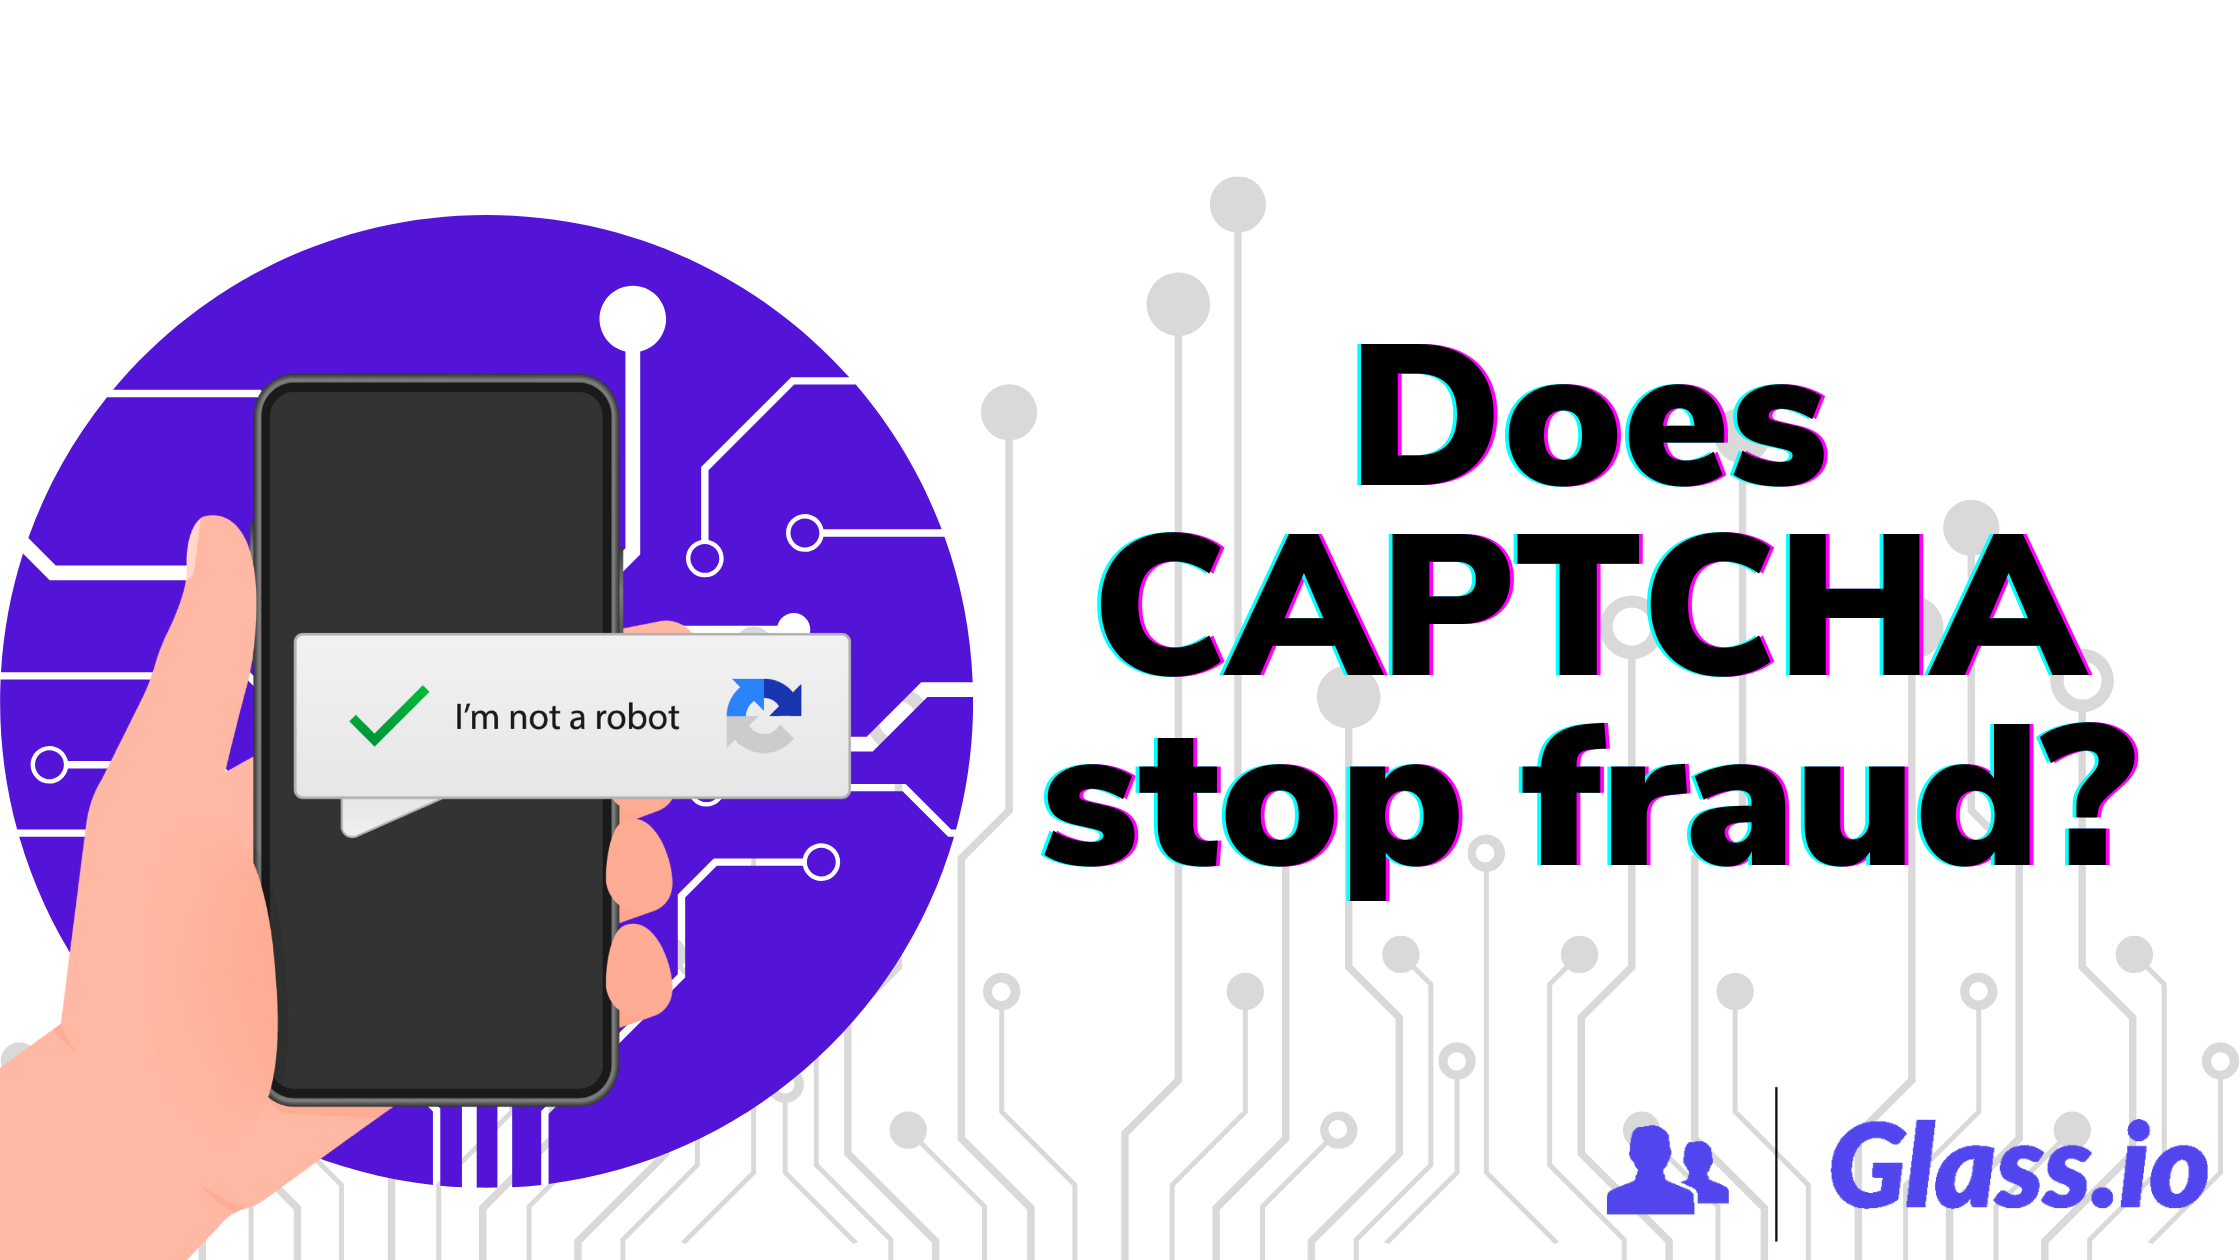 Does CAPTCHA stop fraud?